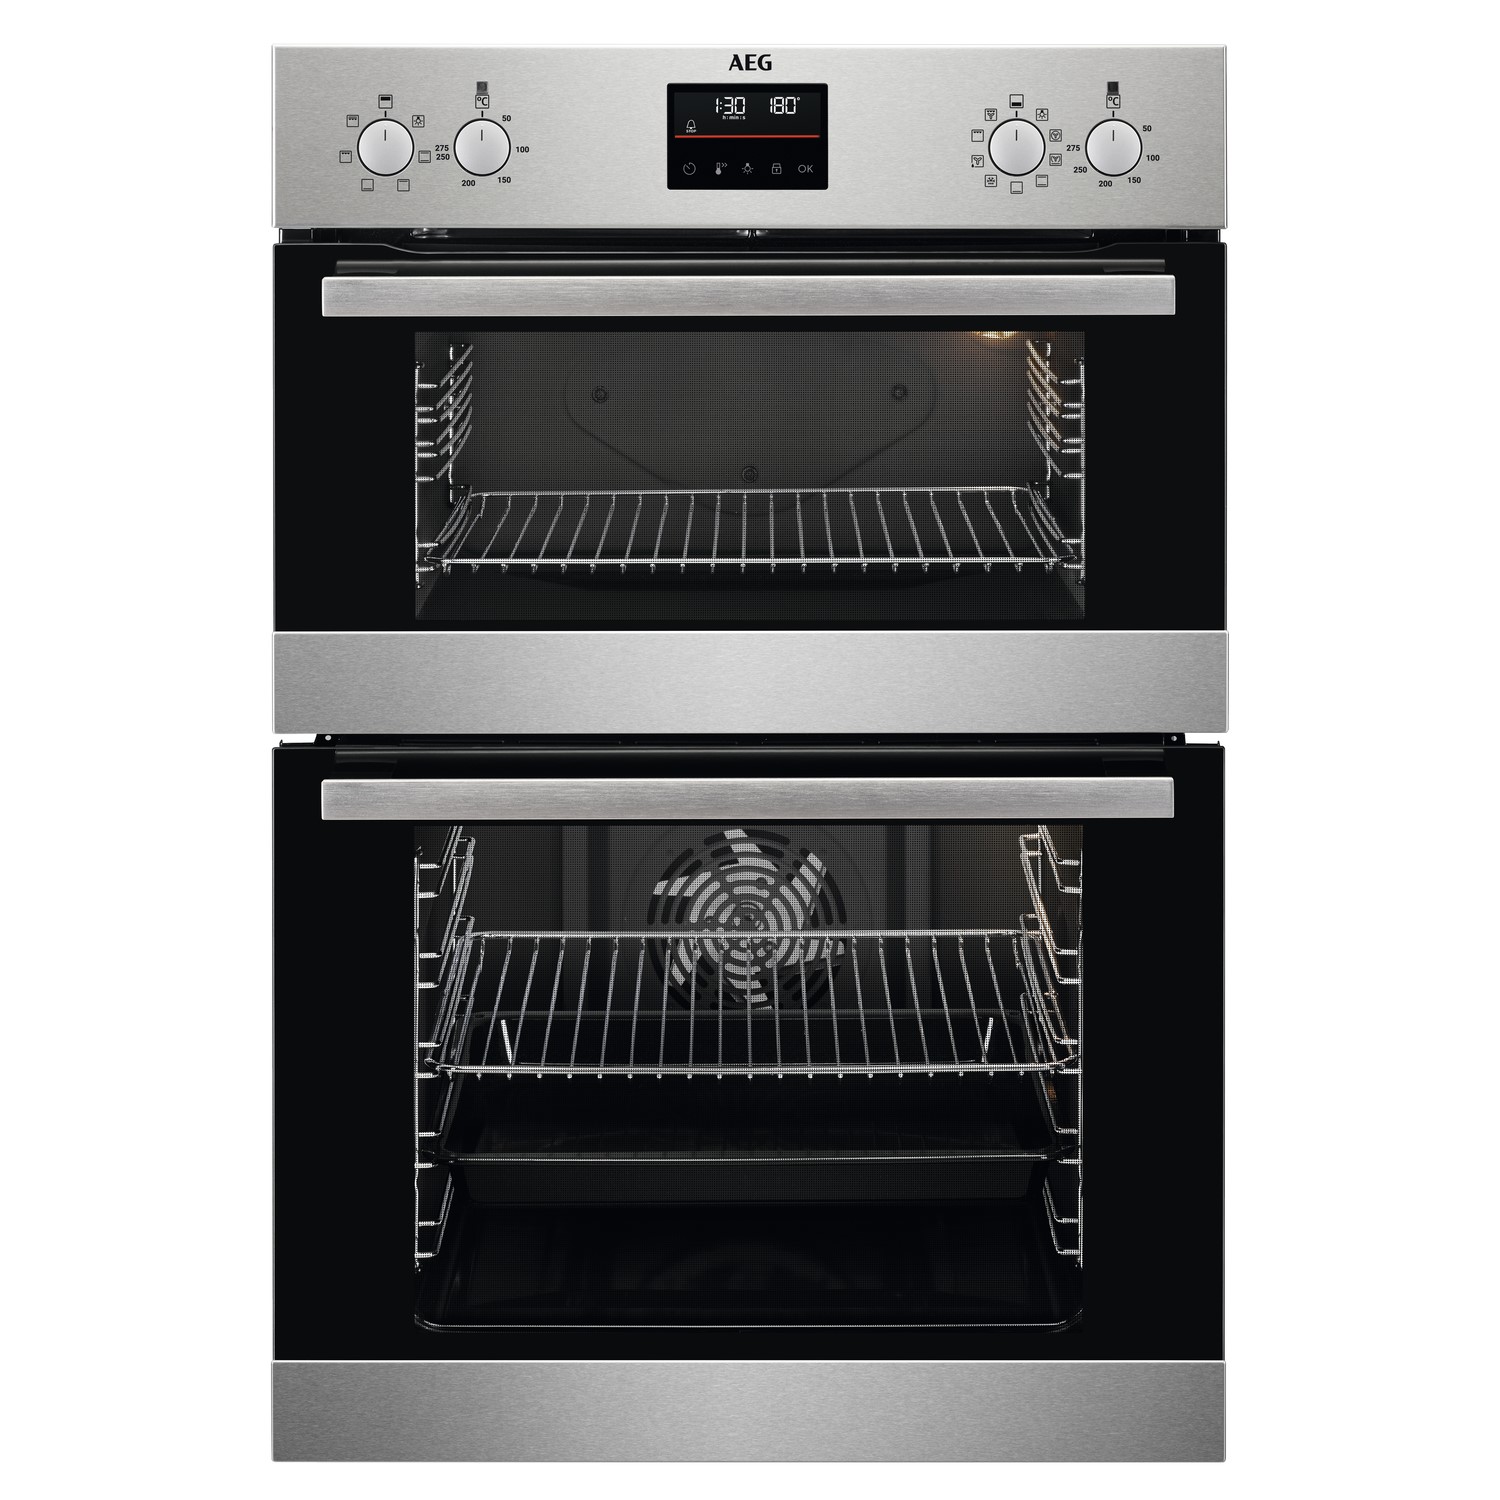 Photos - Other for Computer AEG 6000 Series Built In Electric Double Oven - Stainless Steel 944171779 